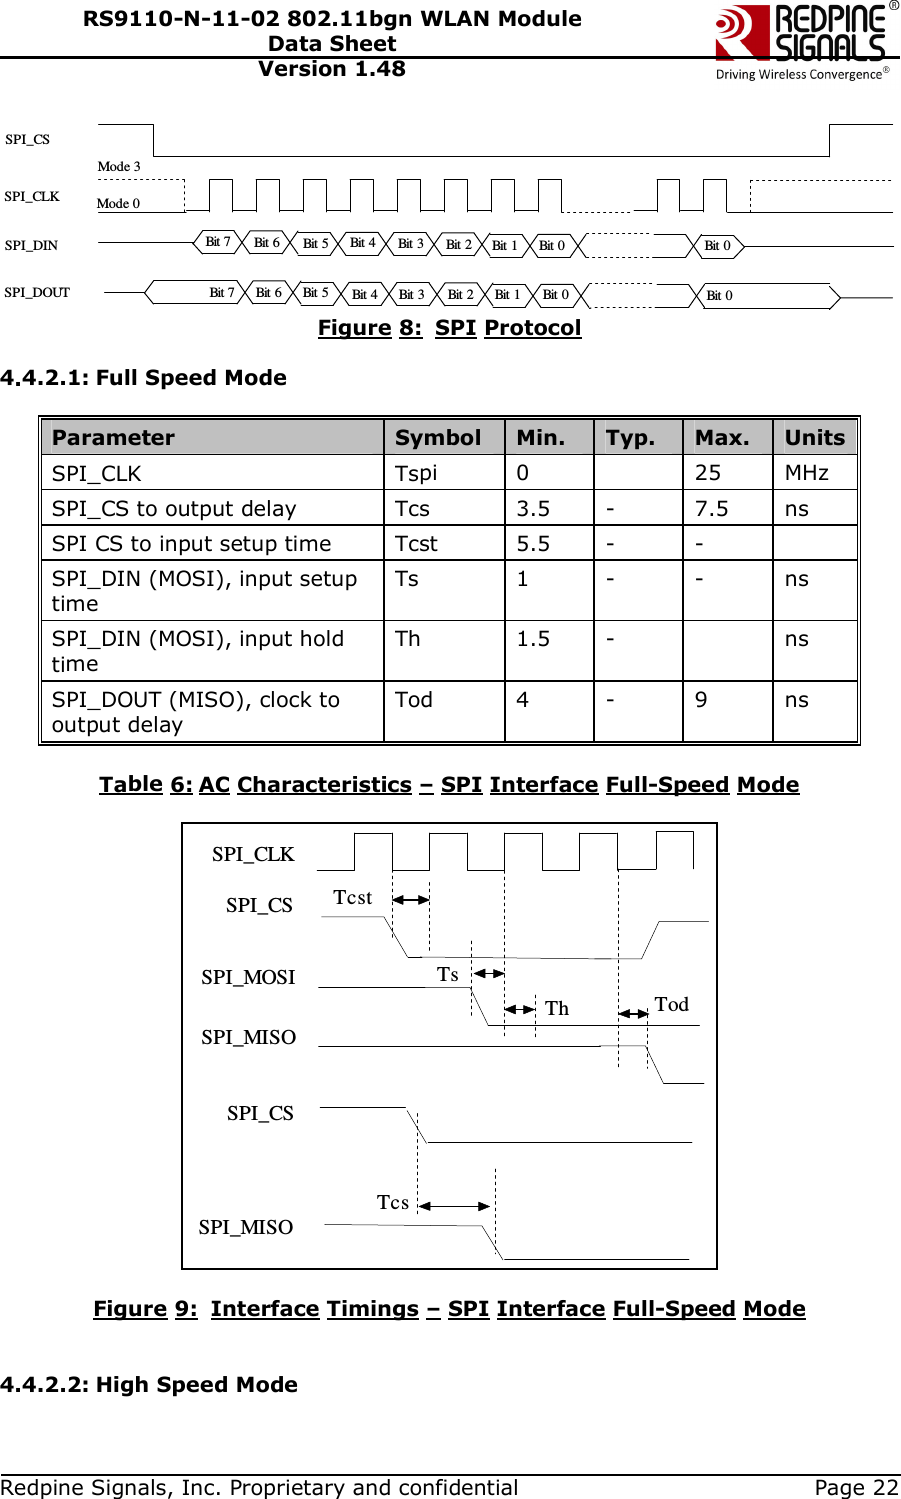   Redpine Signals, Inc. Proprietary and confidential  Page 22 RS9110-N-11-02 802.11bgn WLAN Module Data Sheet Version 1.48 Bit 7 Bit 6 Bit 5 Bit 4 Bit 3 Bit 2 Bit 1 Bit 0SPI_CSSPI_CLKSPI_DINSPI_DOUT Bit 7 Bit 6 Bit 5 Bit 4 Bit 3 Bit 2 Bit 1 Bit 0Bit 0Bit 0Mode 0Mode 3 Figure 8:  SPI Protocol  4.4.2.1: Full Speed Mode  Parameter  Symbol  Min.  Typ.  Max.  Units SPI_CLK  Tspi  0    25  MHz SPI_CS to output delay  Tcs  3.5  -  7.5  ns SPI CS to input setup time  Tcst  5.5  -  -   SPI_DIN (MOSI), input setup time  Ts  1  -  -  ns SPI_DIN (MOSI), input hold time Th  1.5  -    ns SPI_DOUT (MISO), clock to output delay Tod  4  -  9  ns  Table 6: AC Characteristics – SPI Interface Full-Speed Mode  SPI_CLK      SPI_CSSPI_MOSISPI_MISOTcstTodTsThTcsSPI_CSSPI_MISO  Figure 9:  Interface Timings – SPI Interface Full-Speed Mode                                                                       4.4.2.2: High Speed Mode  